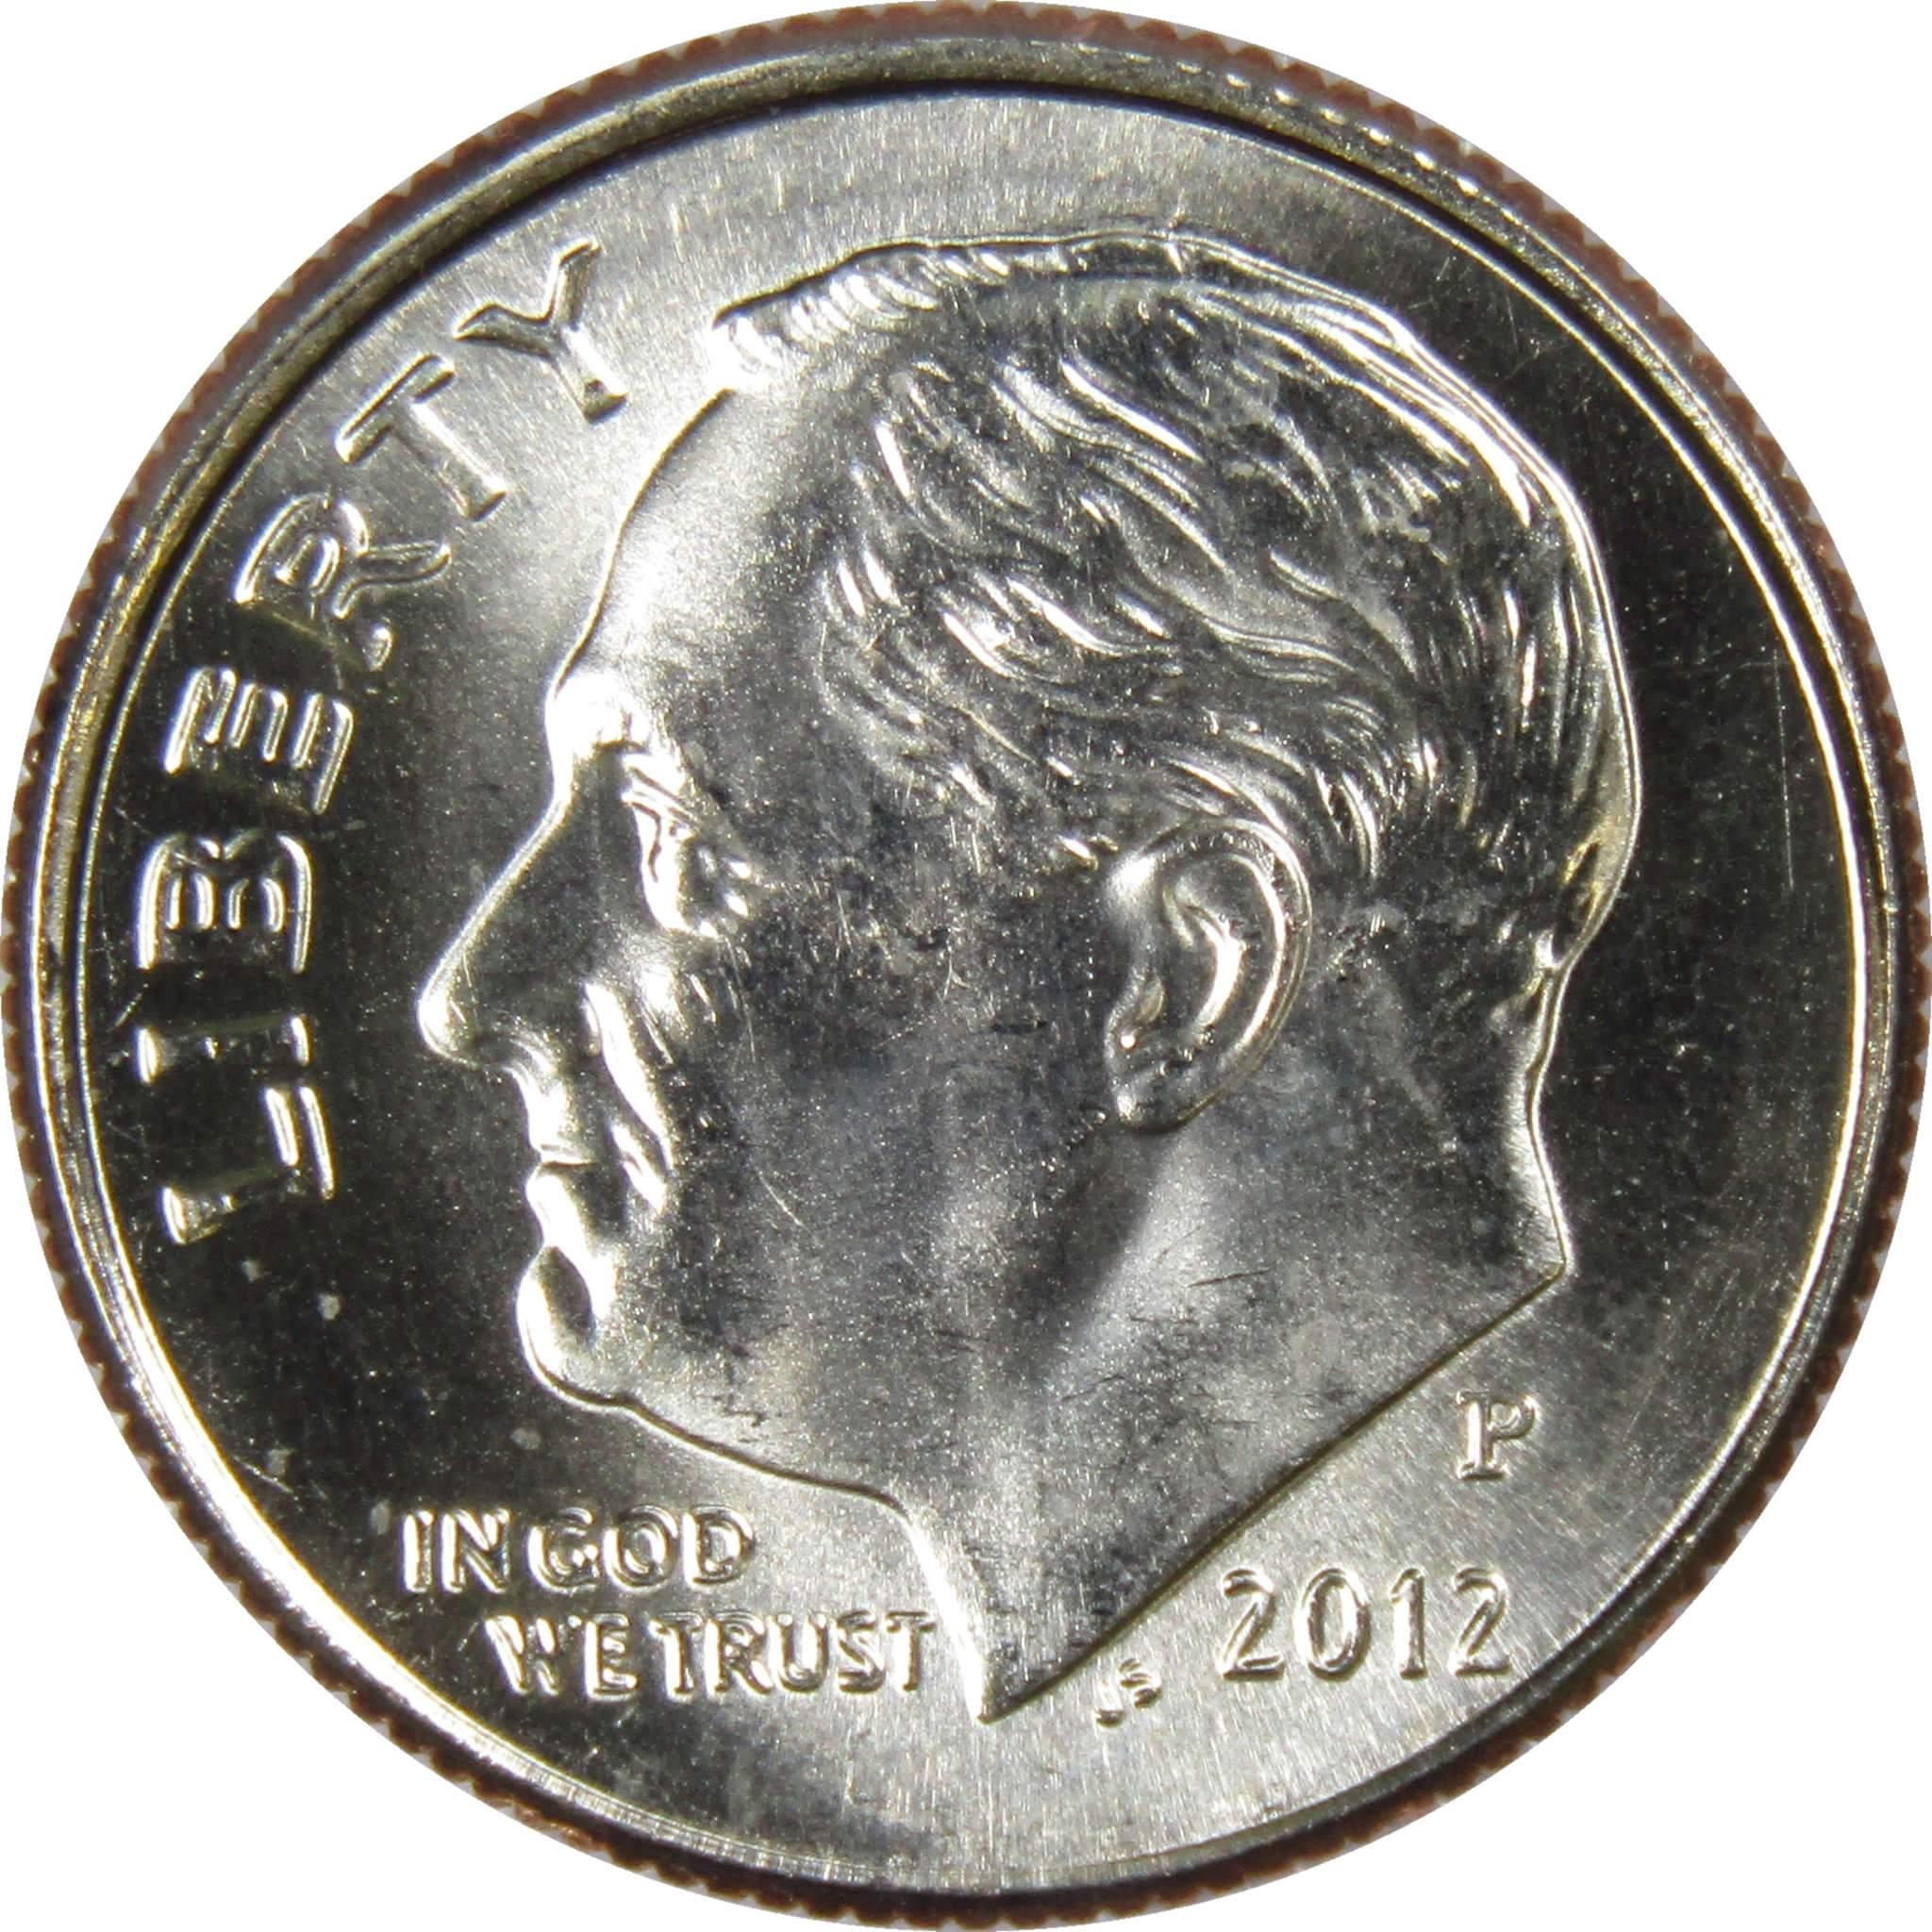 2012 P Roosevelt Dime BU Uncirculated Mint State 10c US Coin Collectible